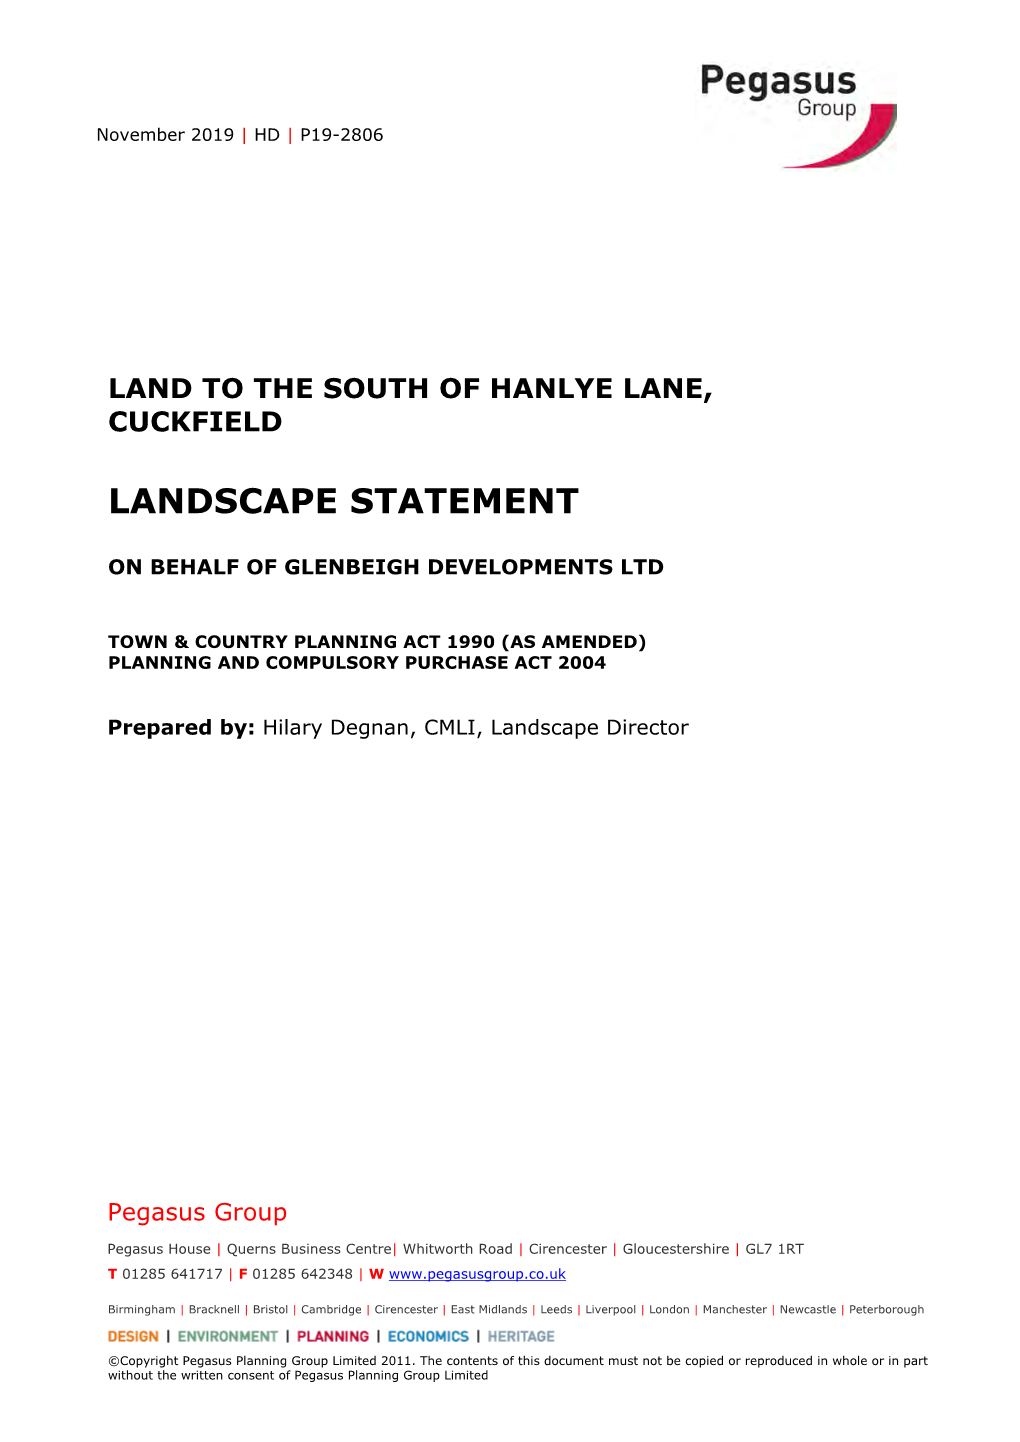 Land to the South of Hanlye Lane, Cuckfield